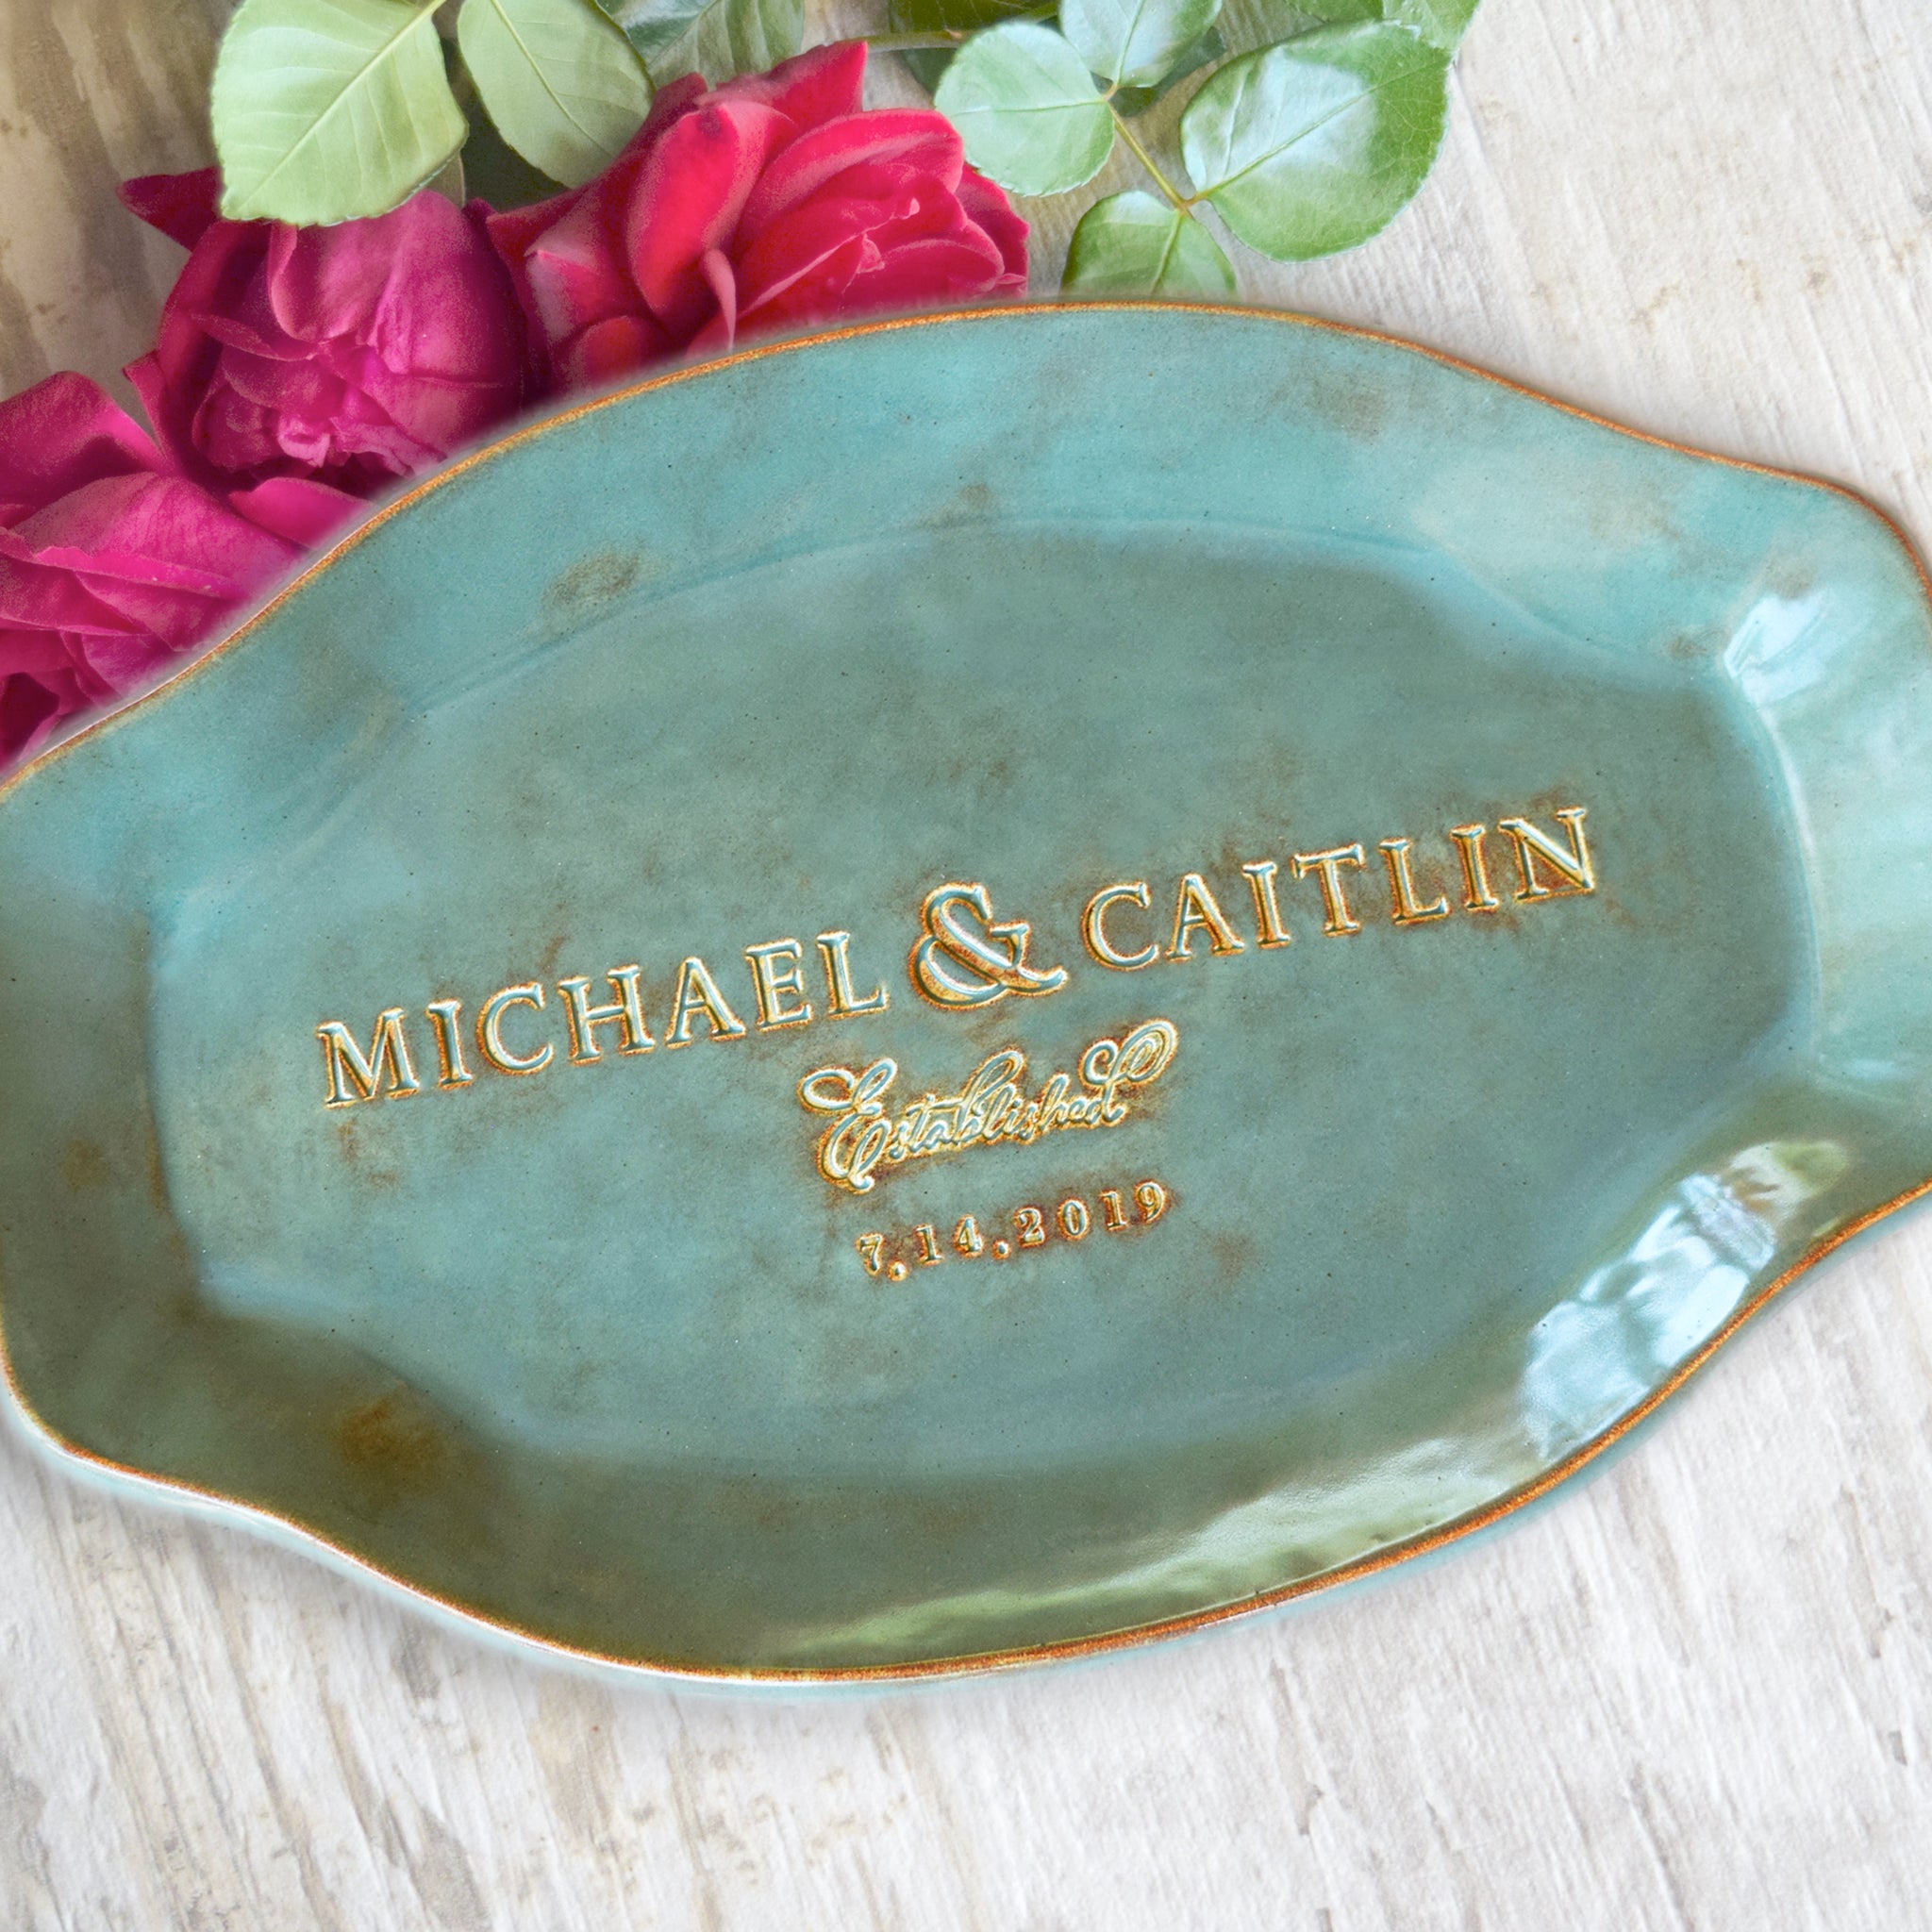 Pottery Wedding Gifts For Couples